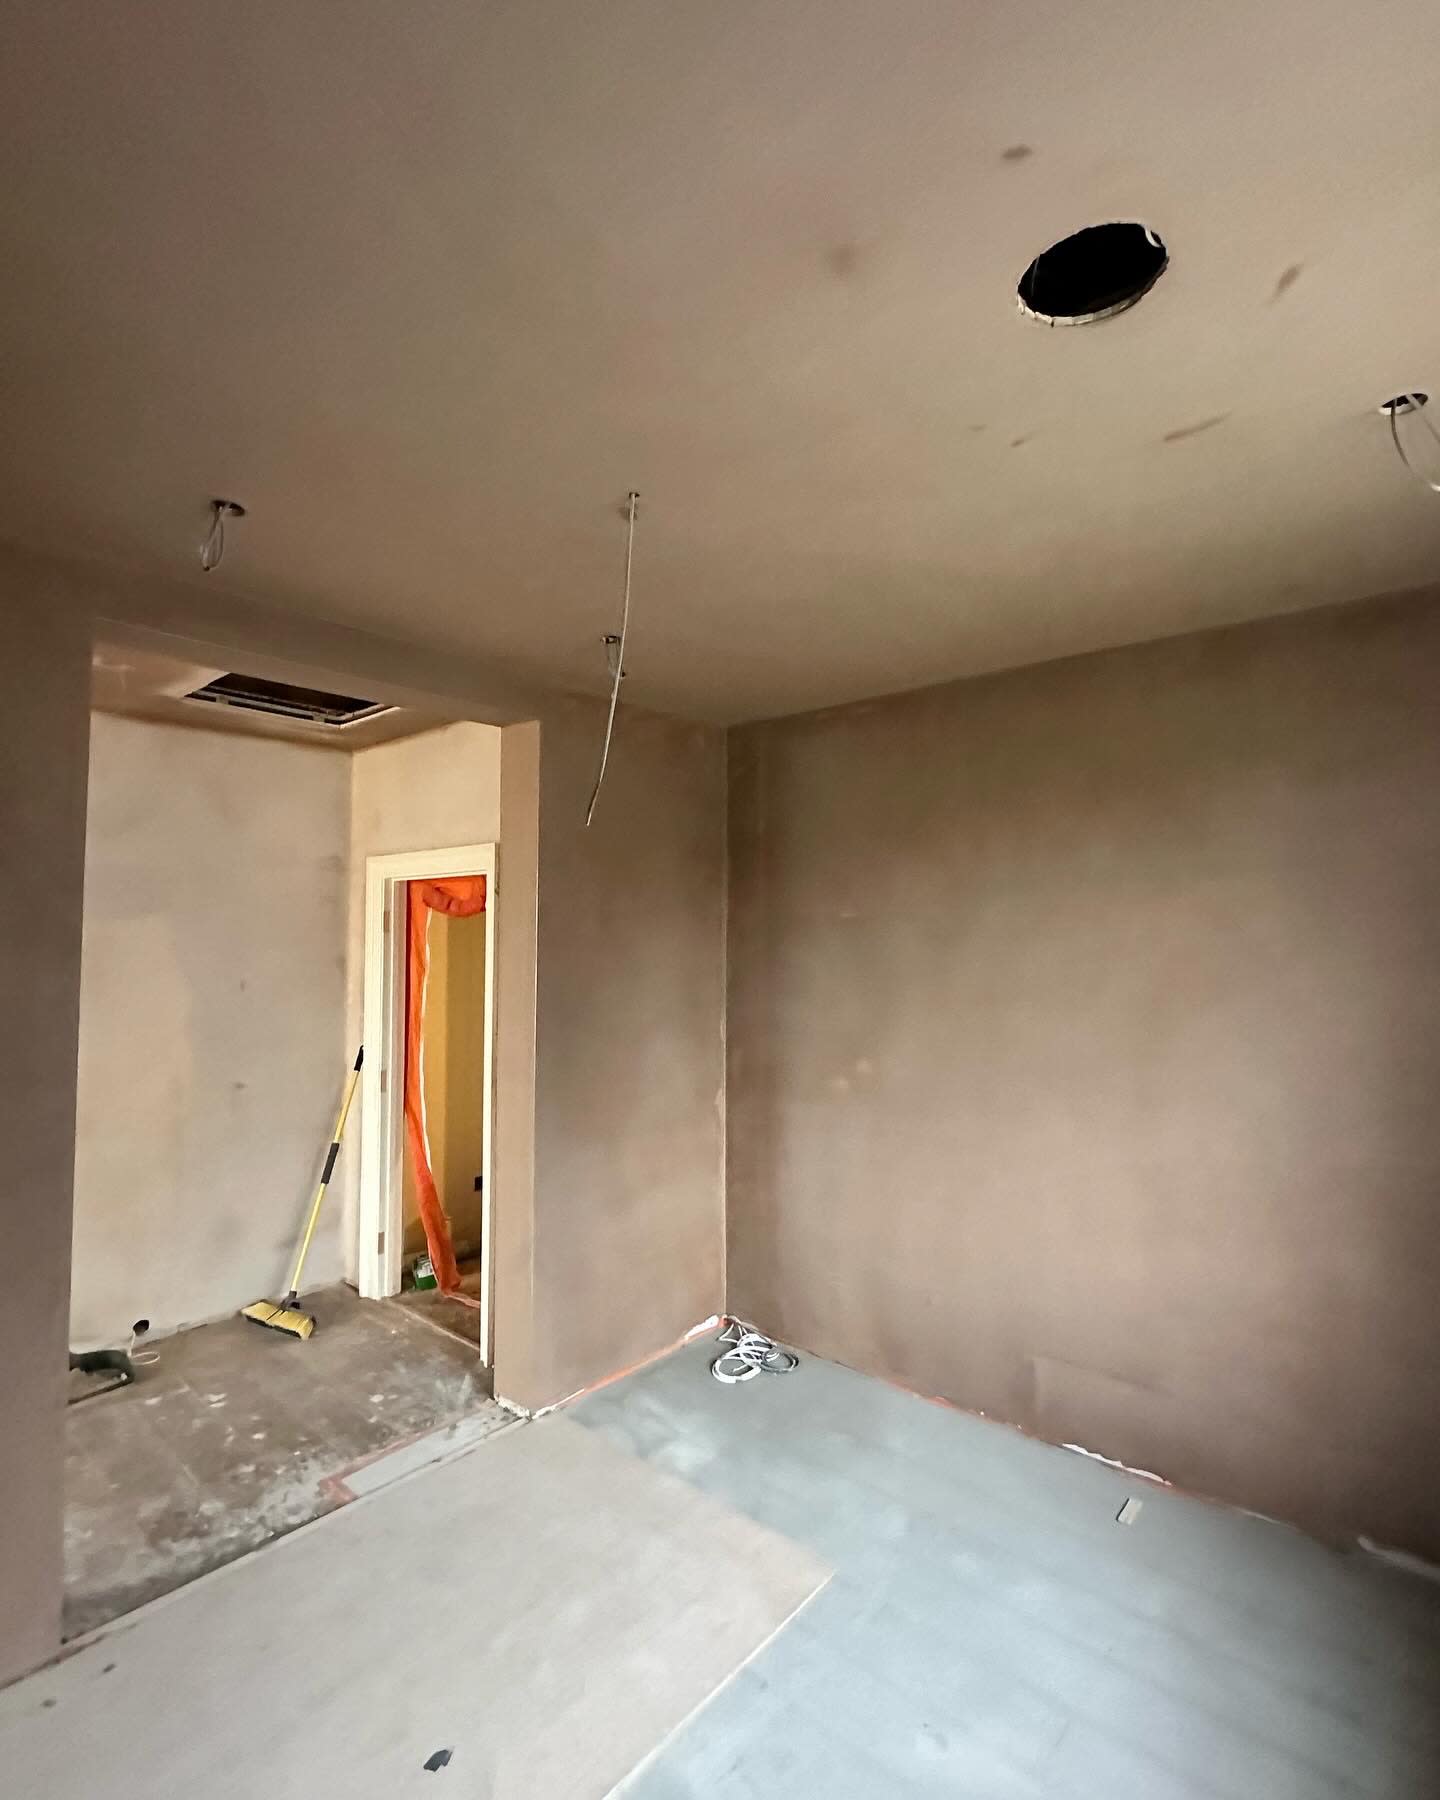 Images SG Plastering & Rendering Services